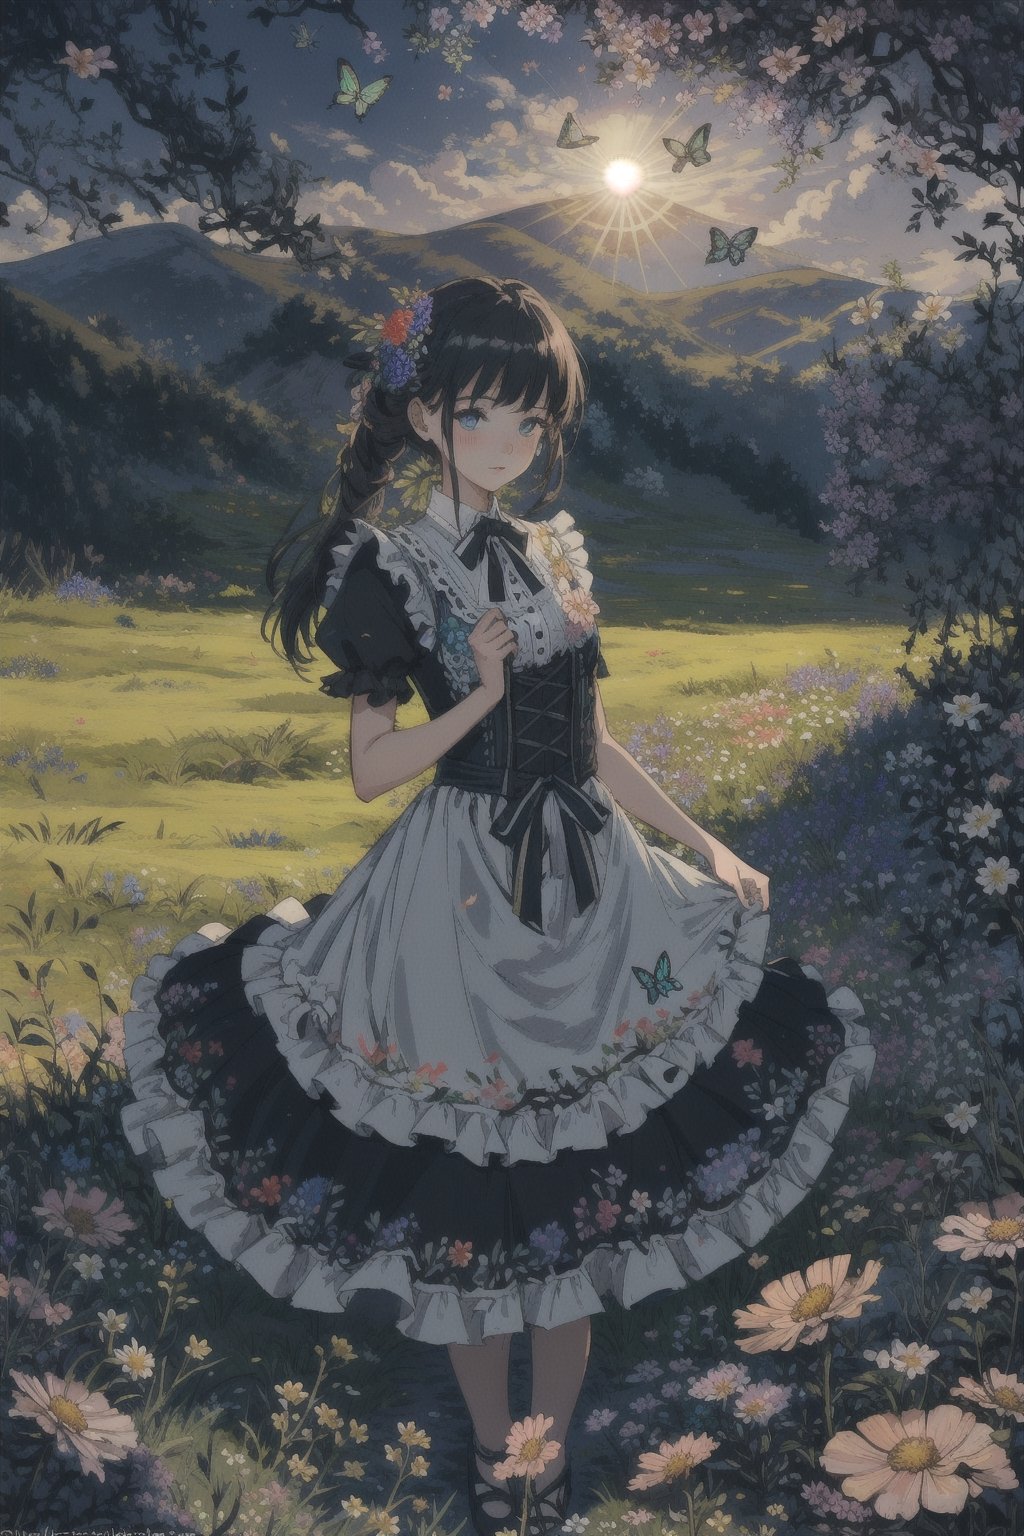 girl in lolita dress, embroidered bodice, silk ribbons, floral motifs, twirling in a sunlit meadow filled with wildflowers, butterflies fluttering around, a gentle breeze rustling her dress, peaceful and idyllic countryside setting,